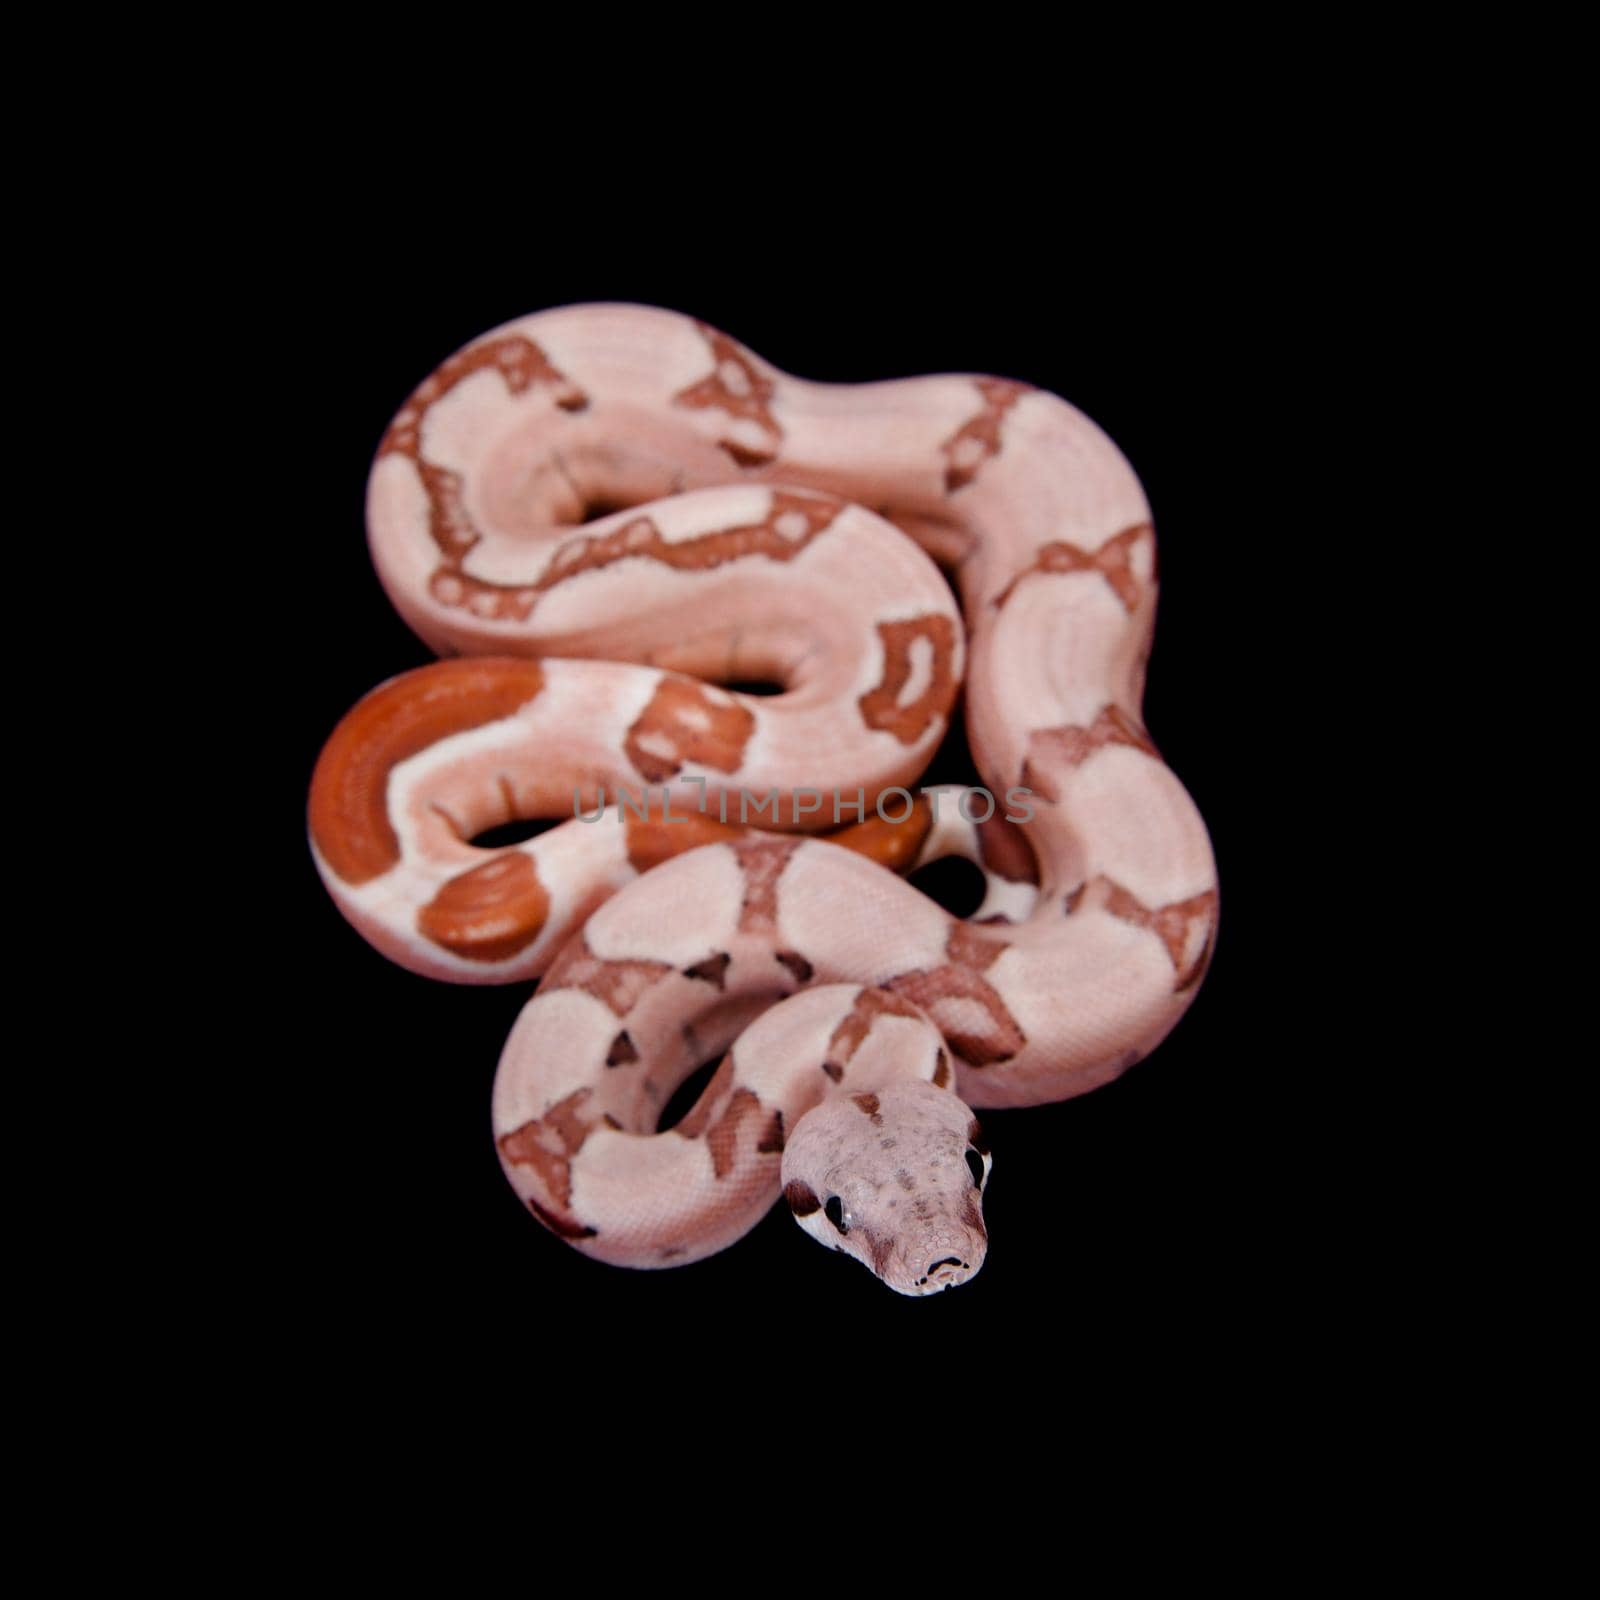 The common boa on black background by RosaJay